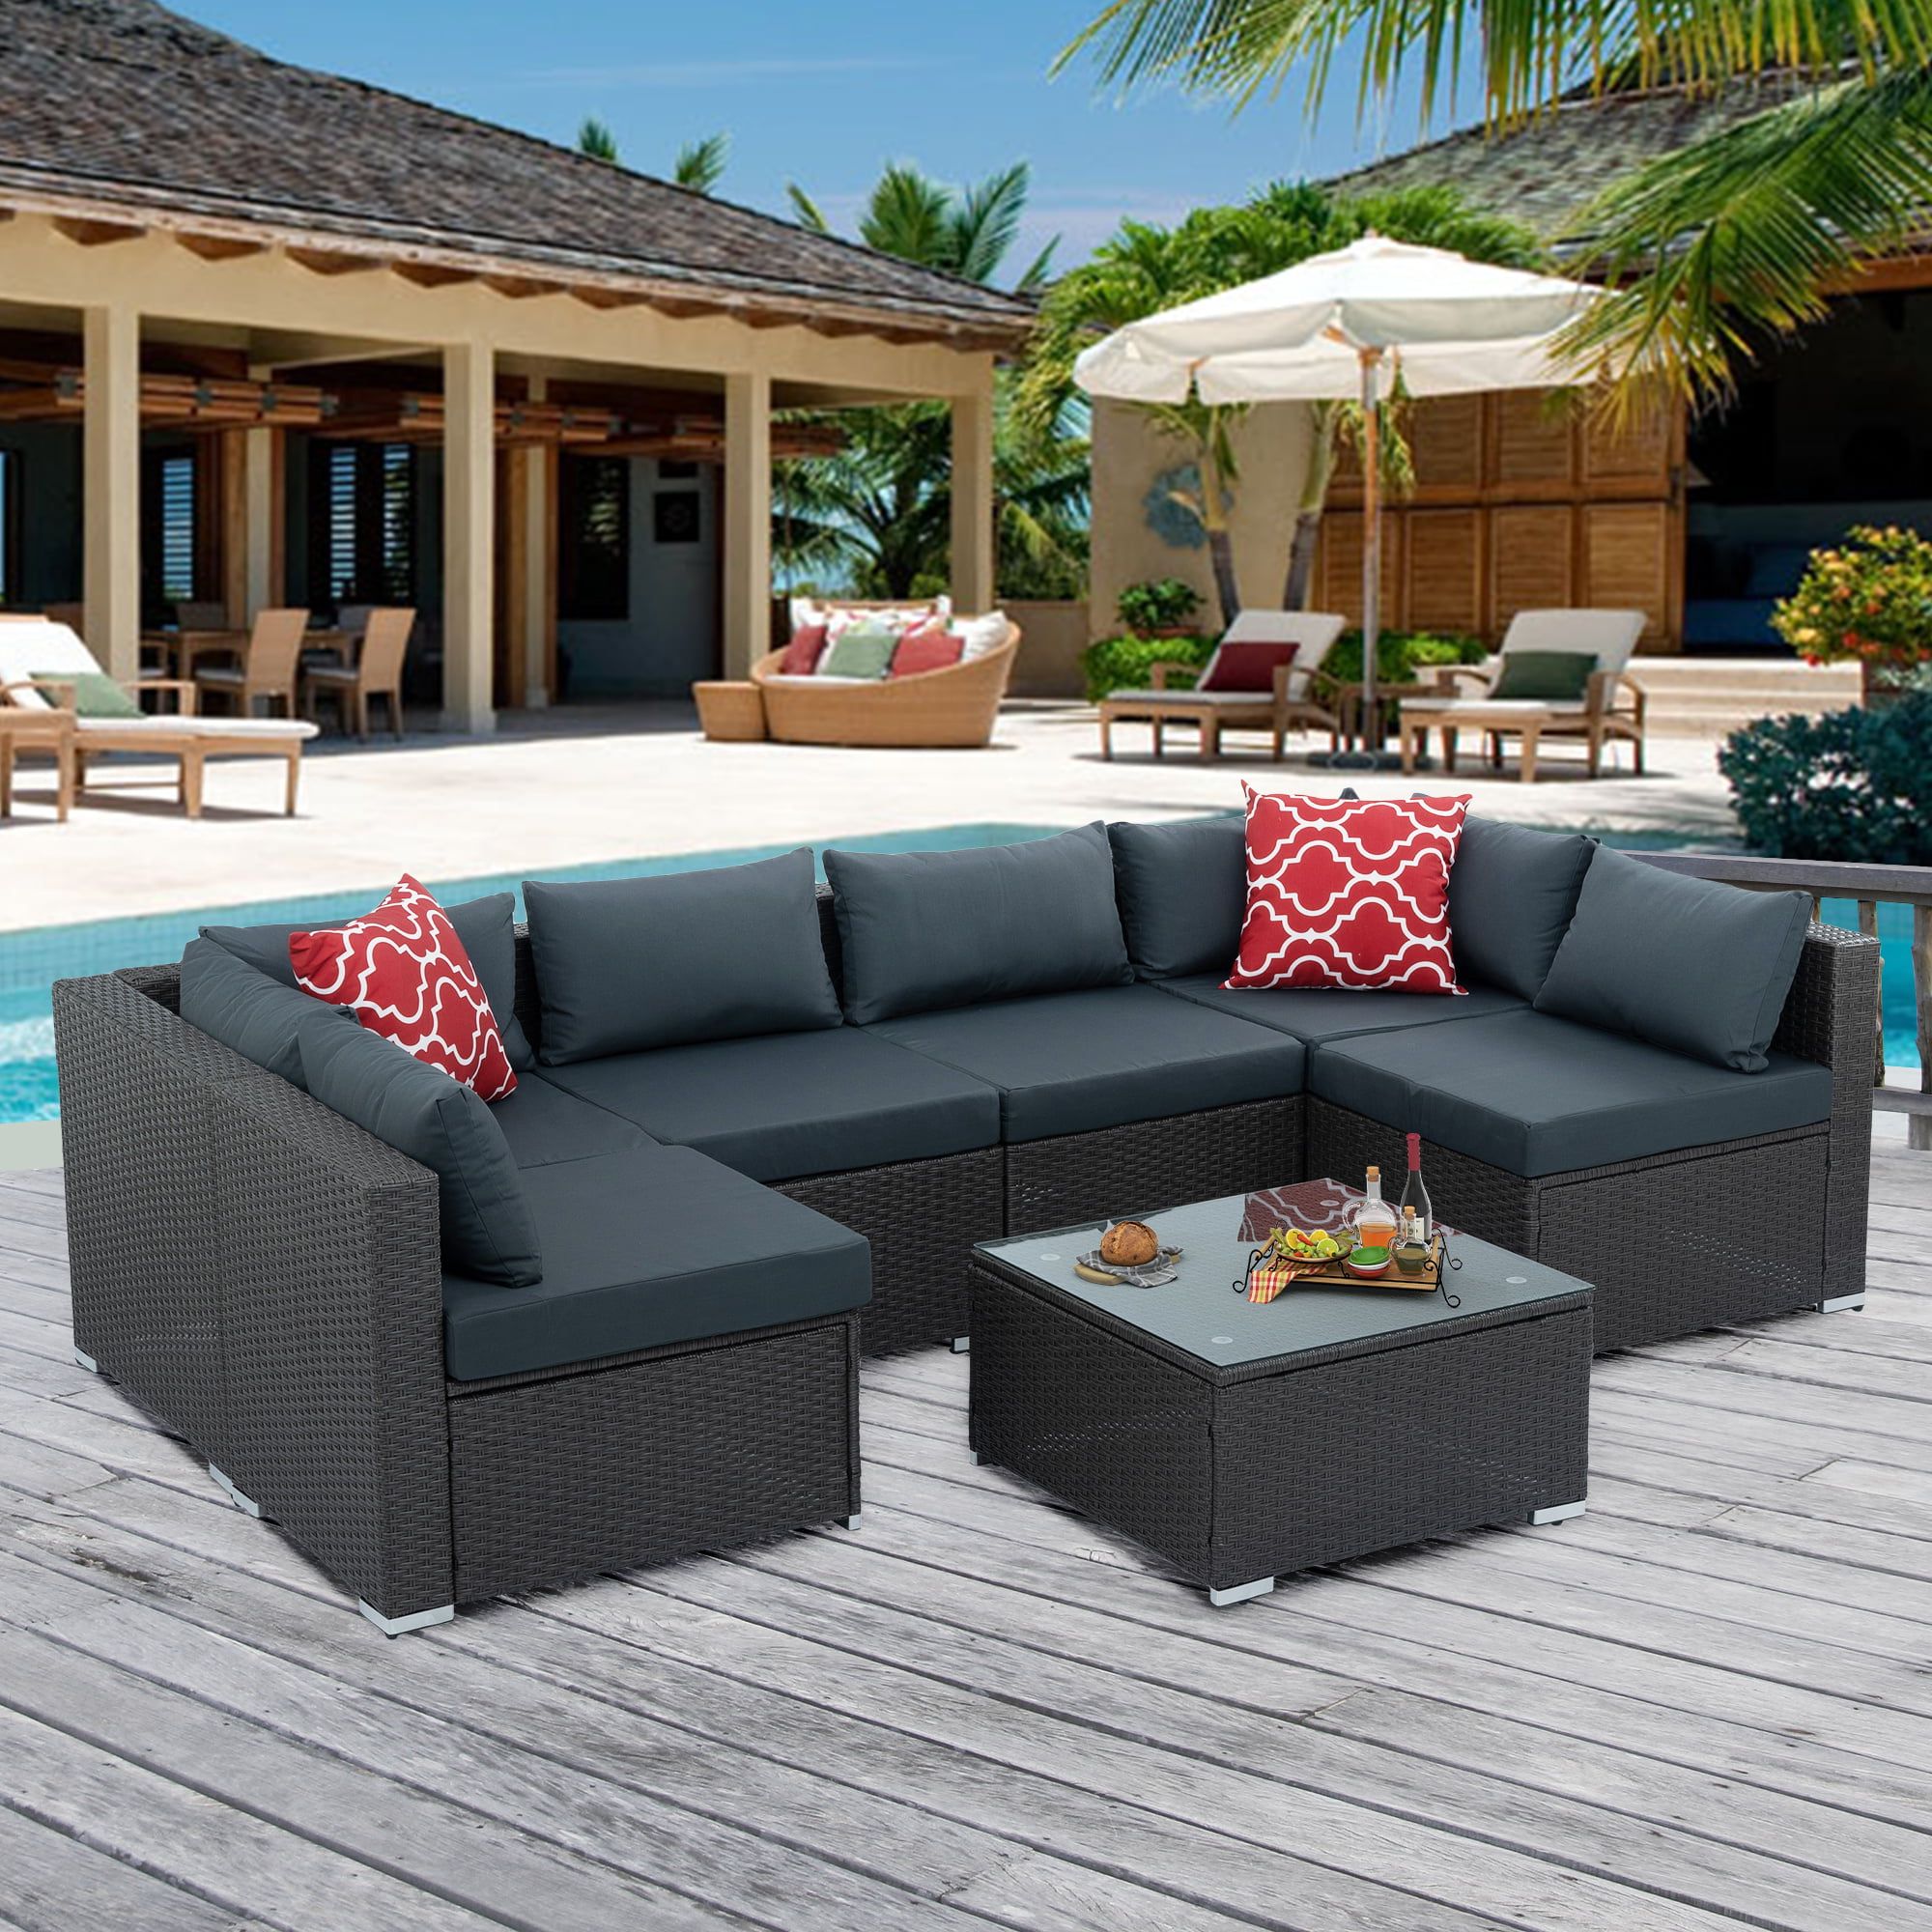 Popular 7 Piece Patio Sectional Sofa Set, Outdoor Conversation Set, All Weather  Wicker Sectional Seating Group With Cushions & Coffee Table, Modern Furniture  Couch Set For Patio Deck Garden Pool, Gray – Walmart Regarding Cushions & Coffee Table Furniture Couch Set (View 3 of 15)